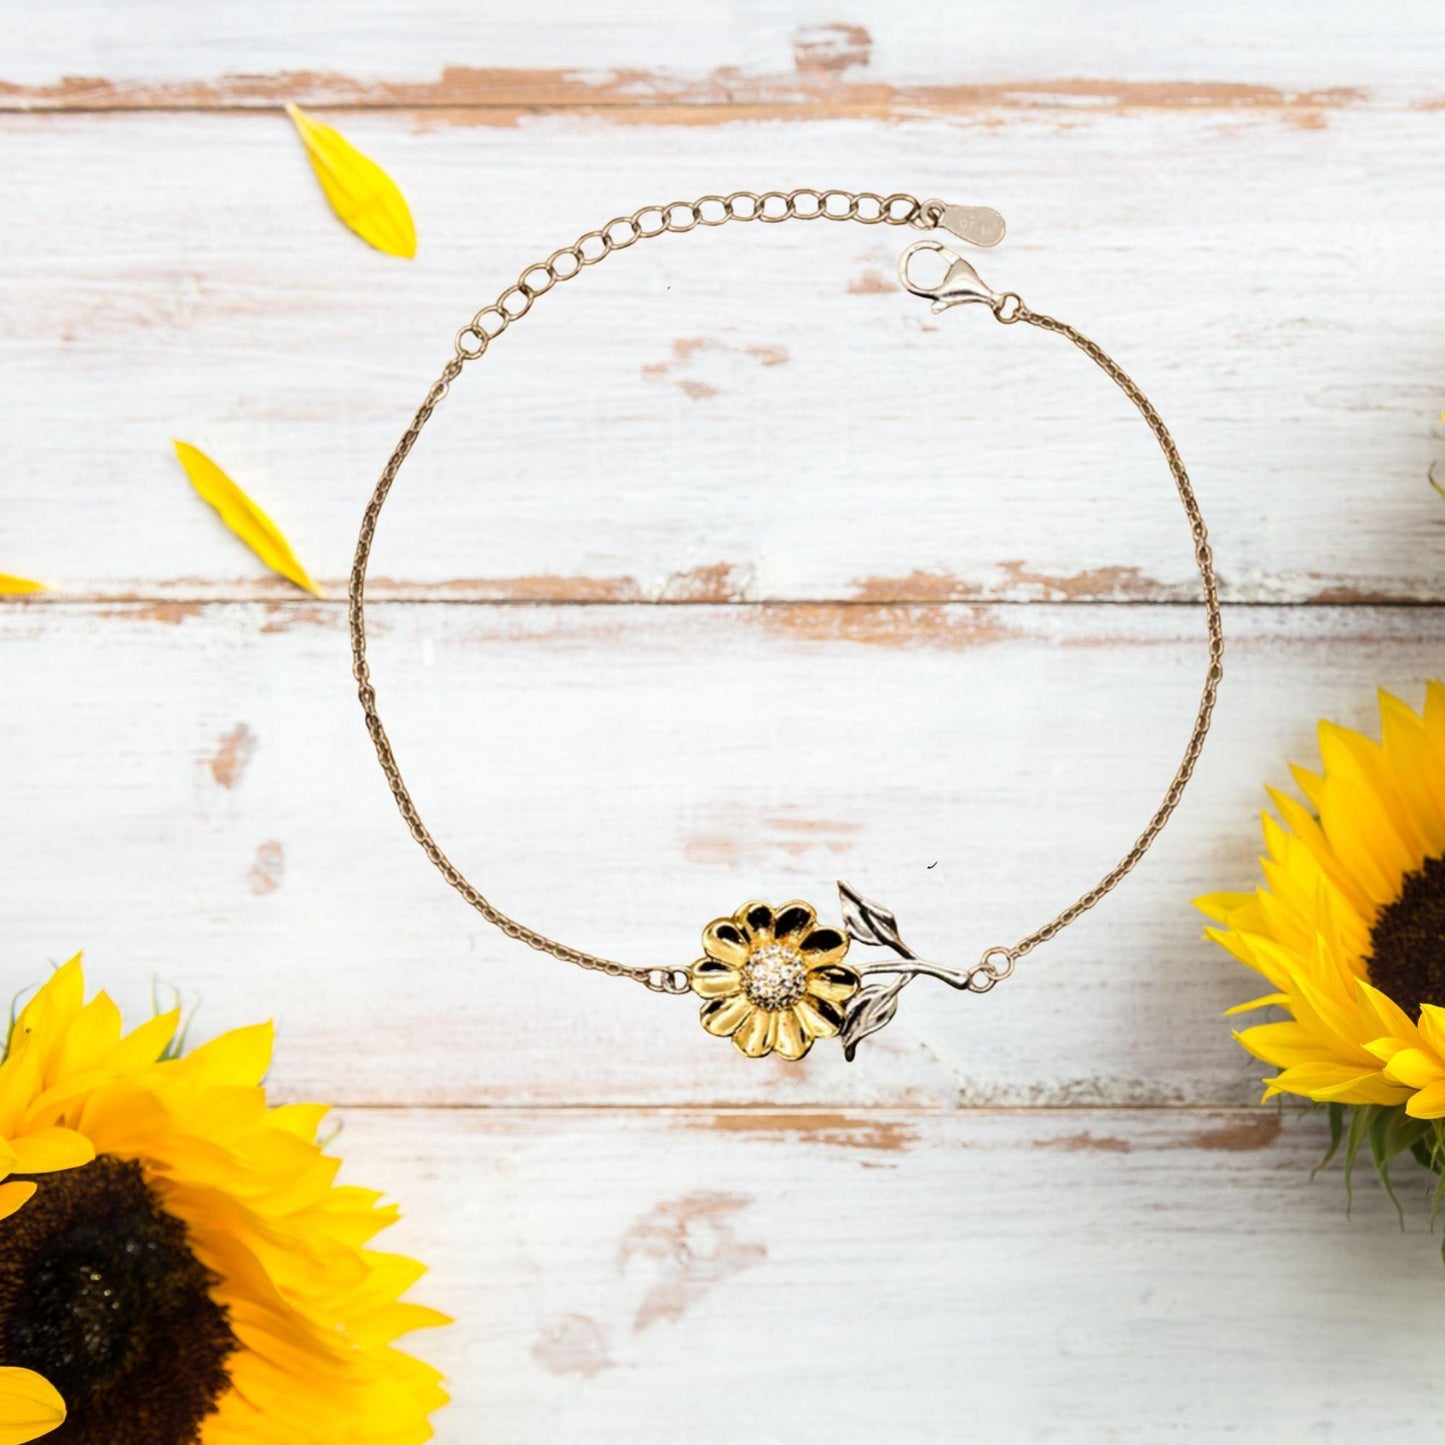 I Left My Heart In Vermont Gifts, Meaningful Vermont State for Friends, Men, Women. Sunflower Bracelet for Vermont People - Mallard Moon Gift Shop